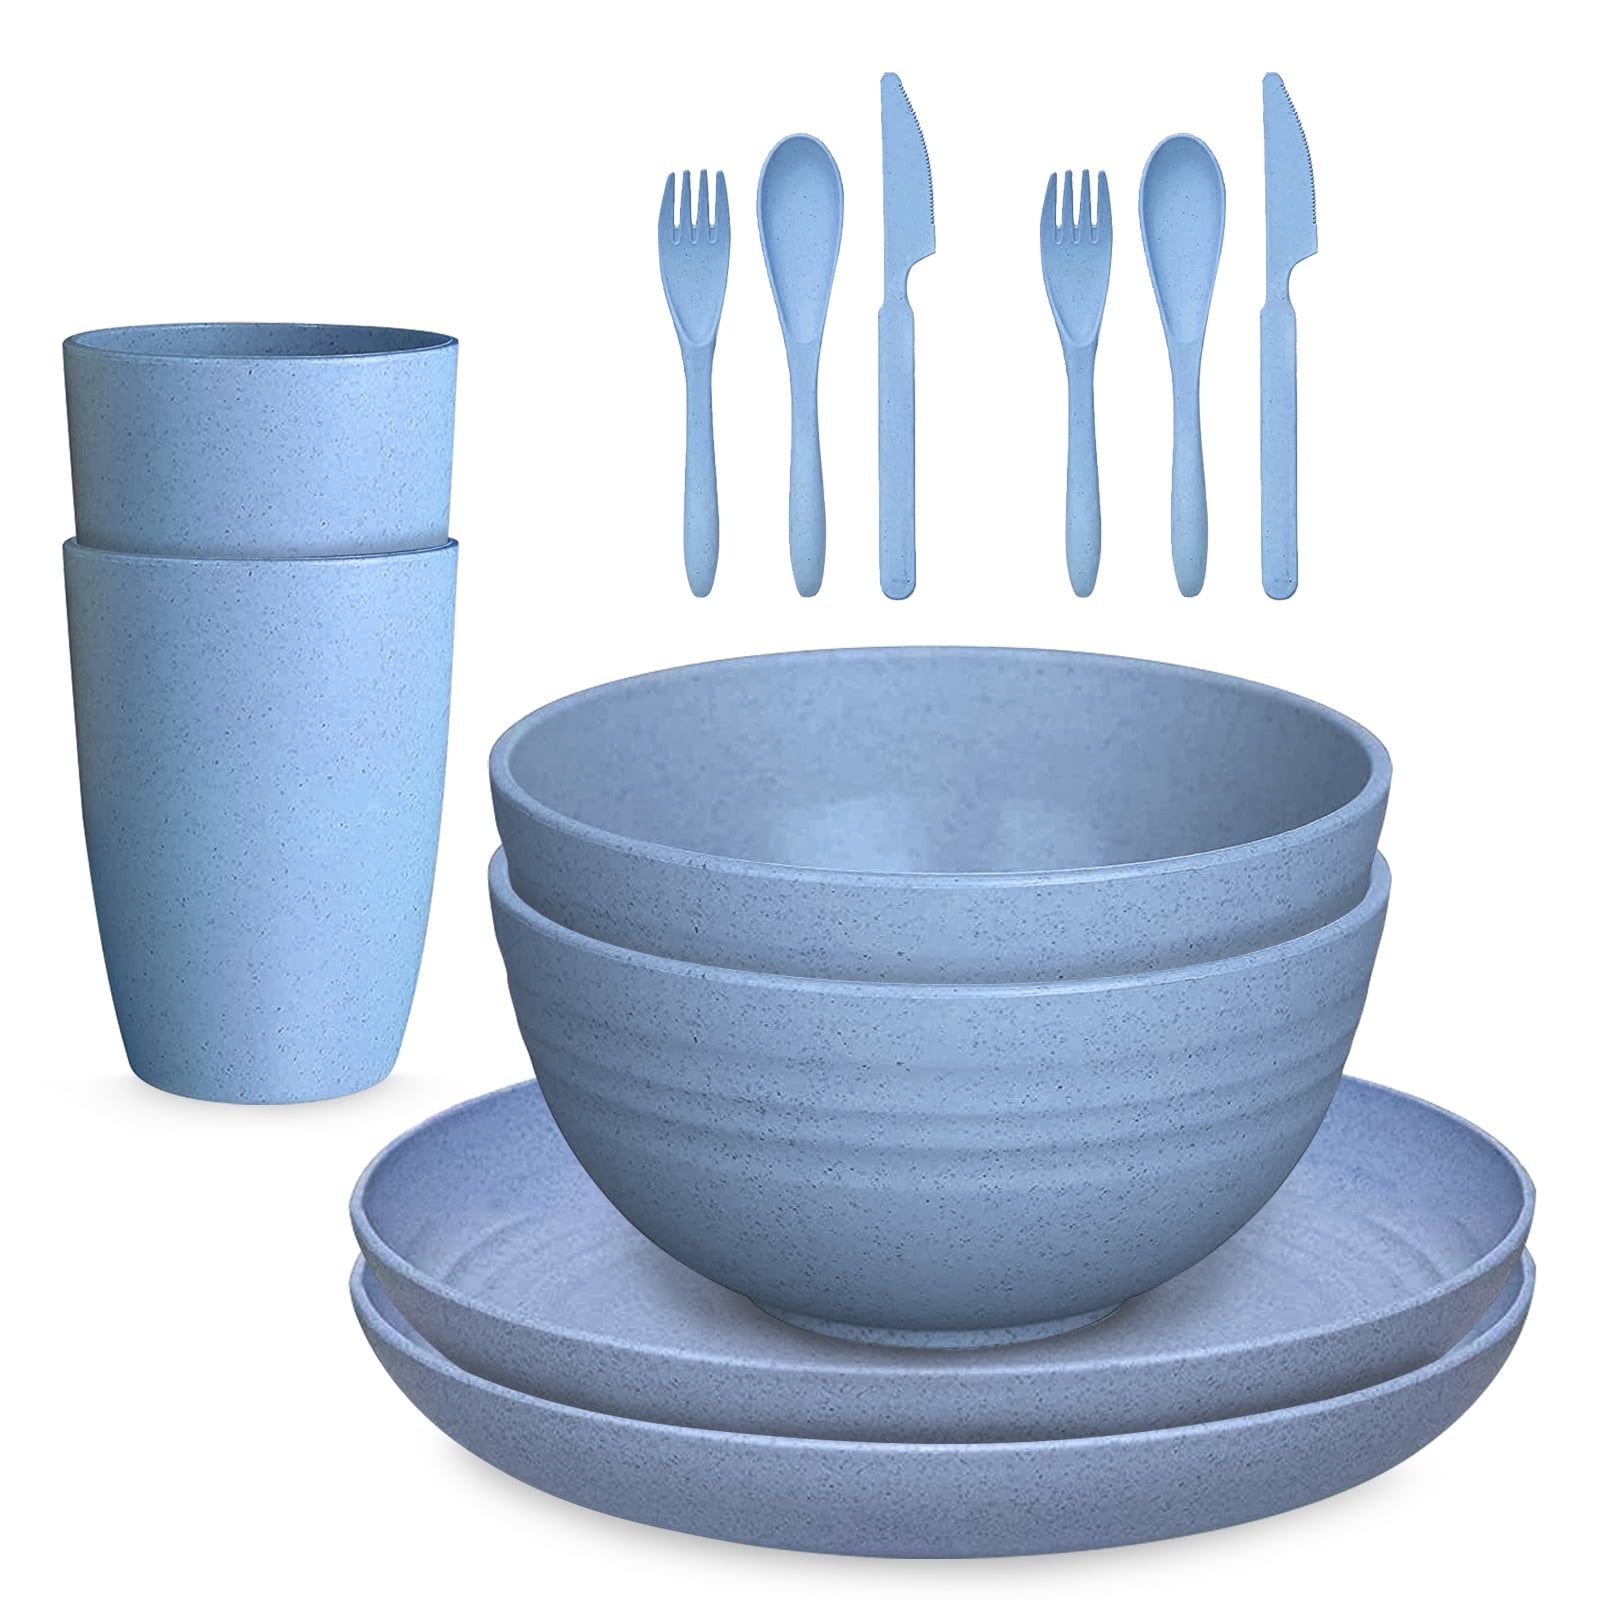 For Events Parties and Home Use Dishwasher Safe 1 Click Bamboo Fiber Reusable Dinnerware Set 16 Pieces for 4 guests Reusable 